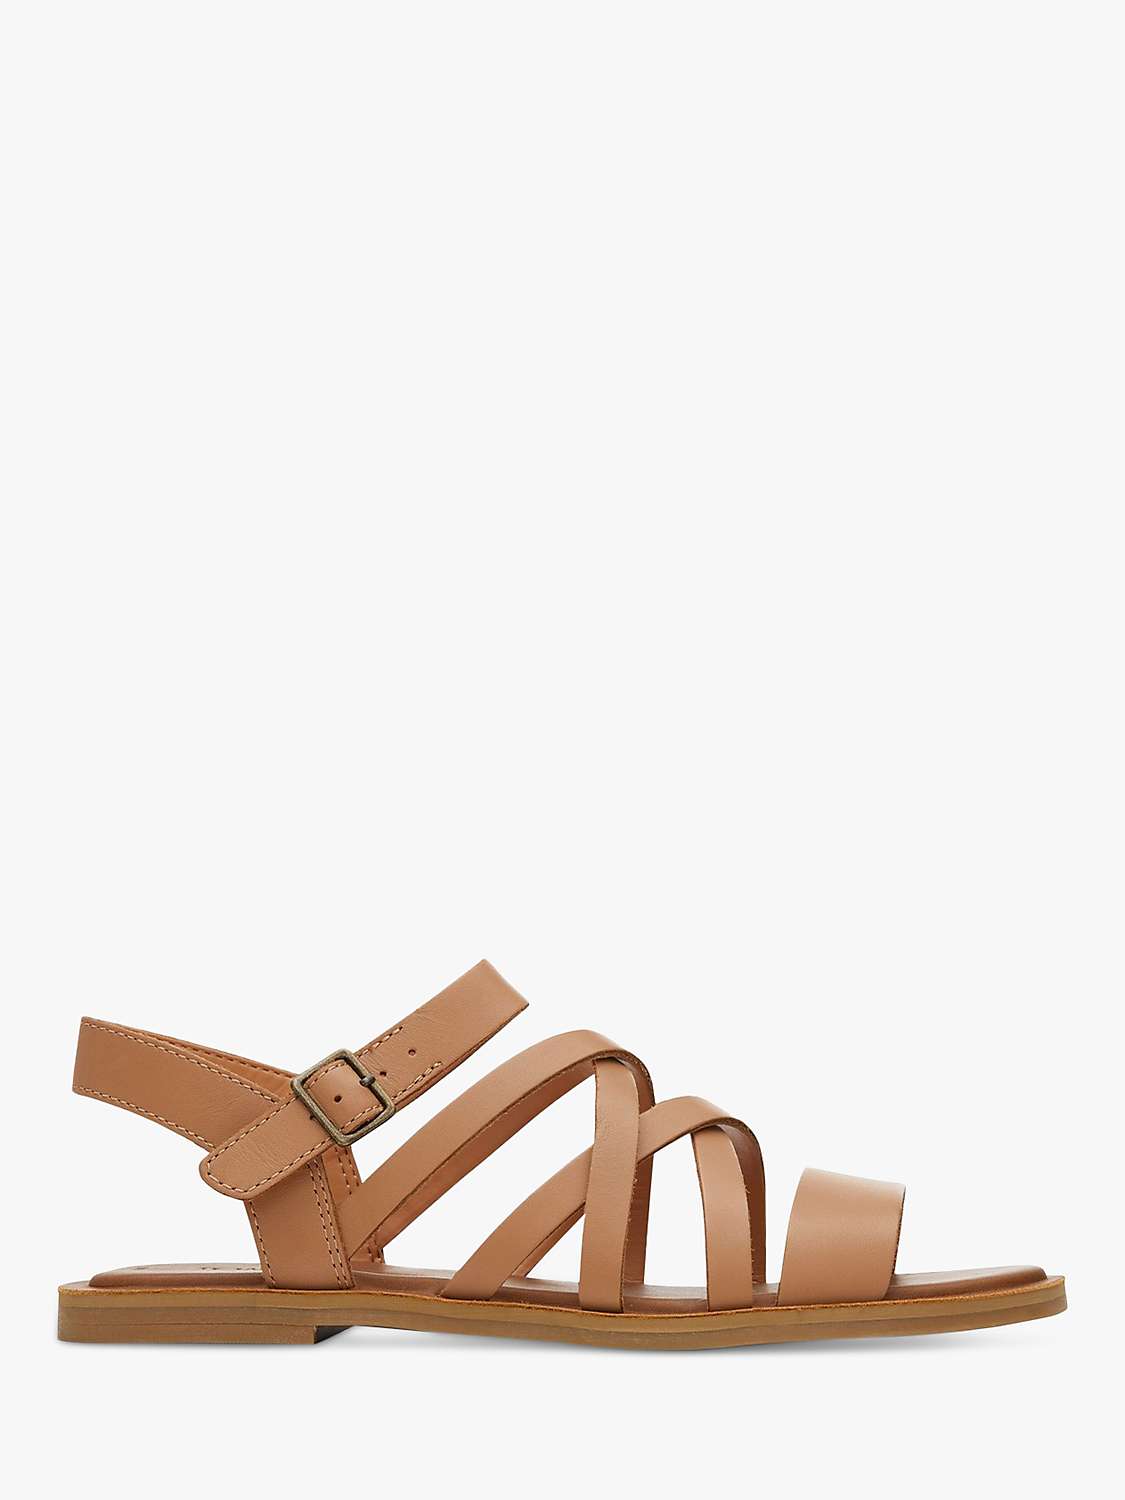 TOMS Sephina Leather Flat Sandals, Sandy Beige at John Lewis & Partners